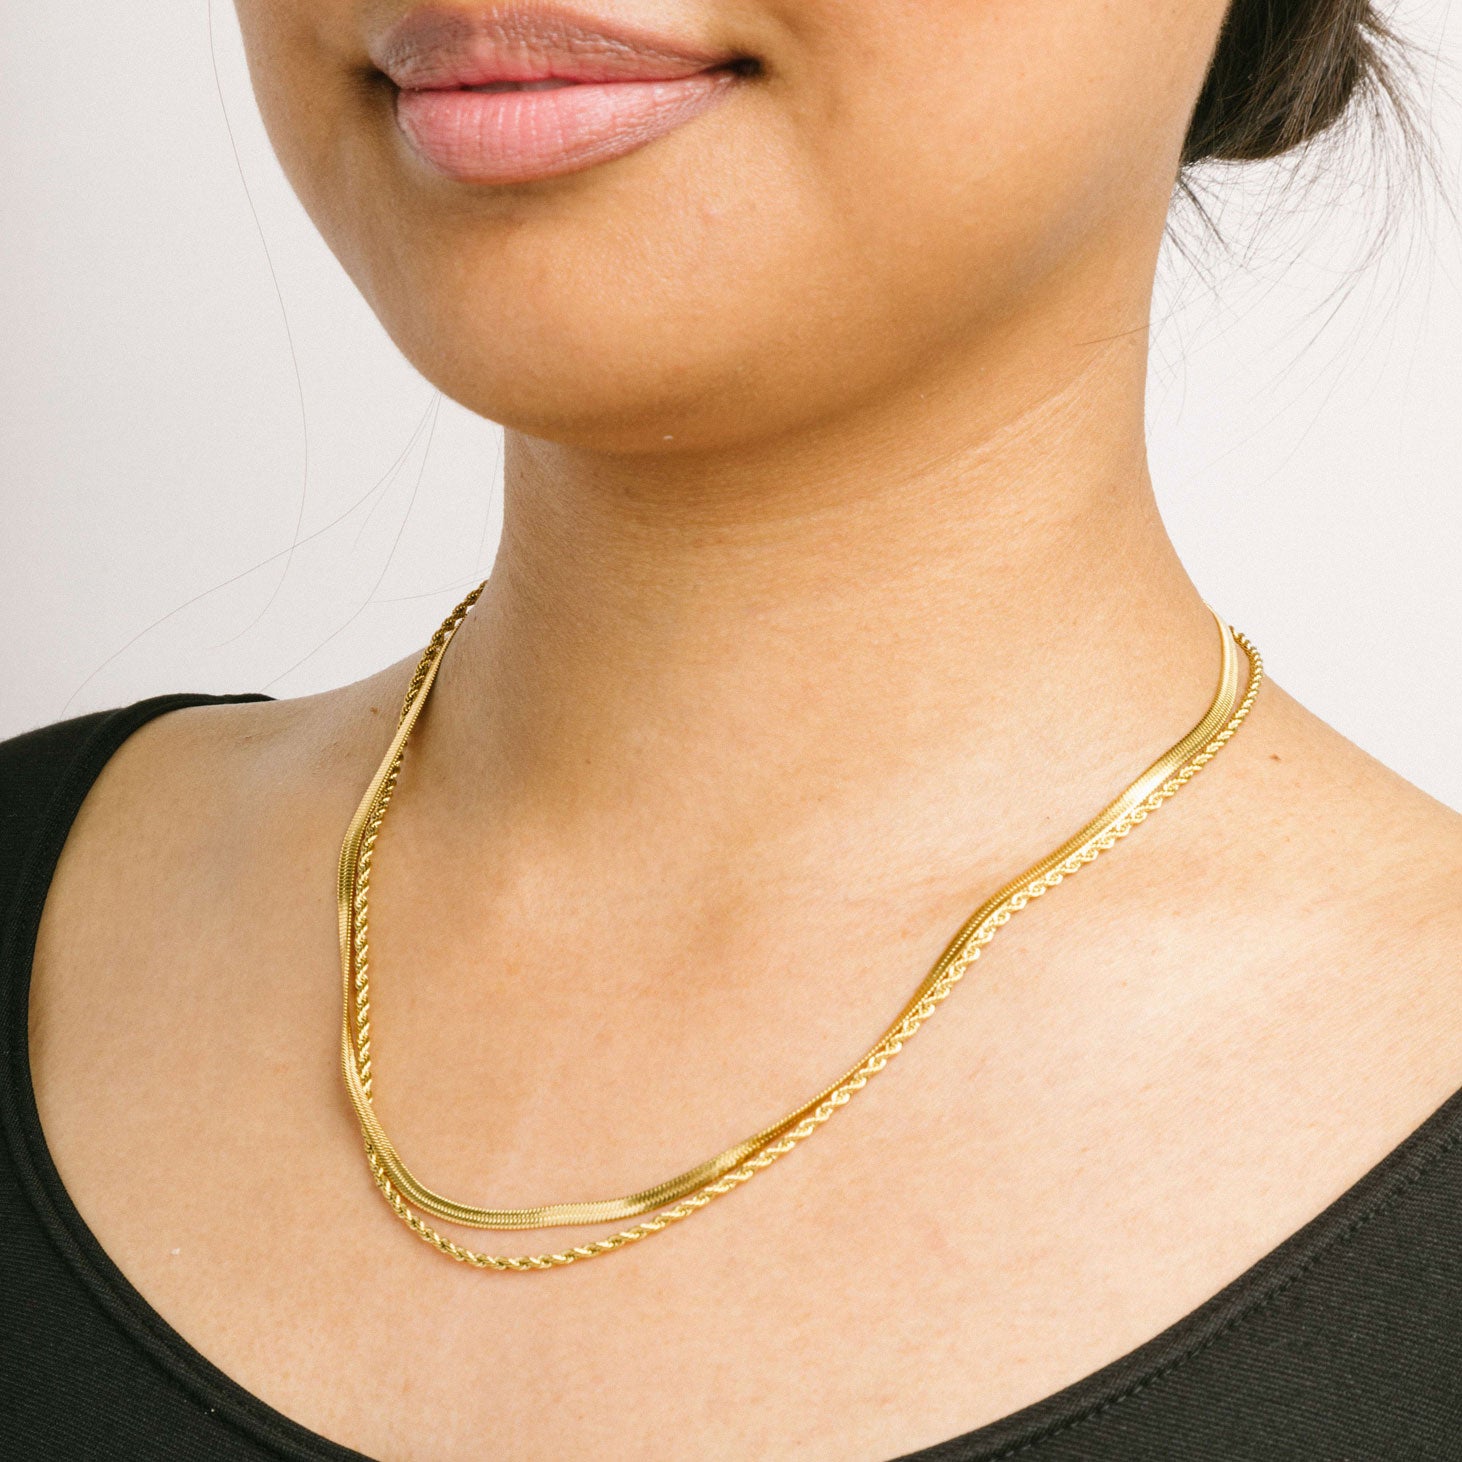 A model wearing the Twisted Double Layered Necklace consists of 14K Gold Plated Stainless Steel, providing water resistance, non-tarnishing, and leading, nickel, and cadmium free properties. Additionally, it is adjustable, though only one necklace is included.